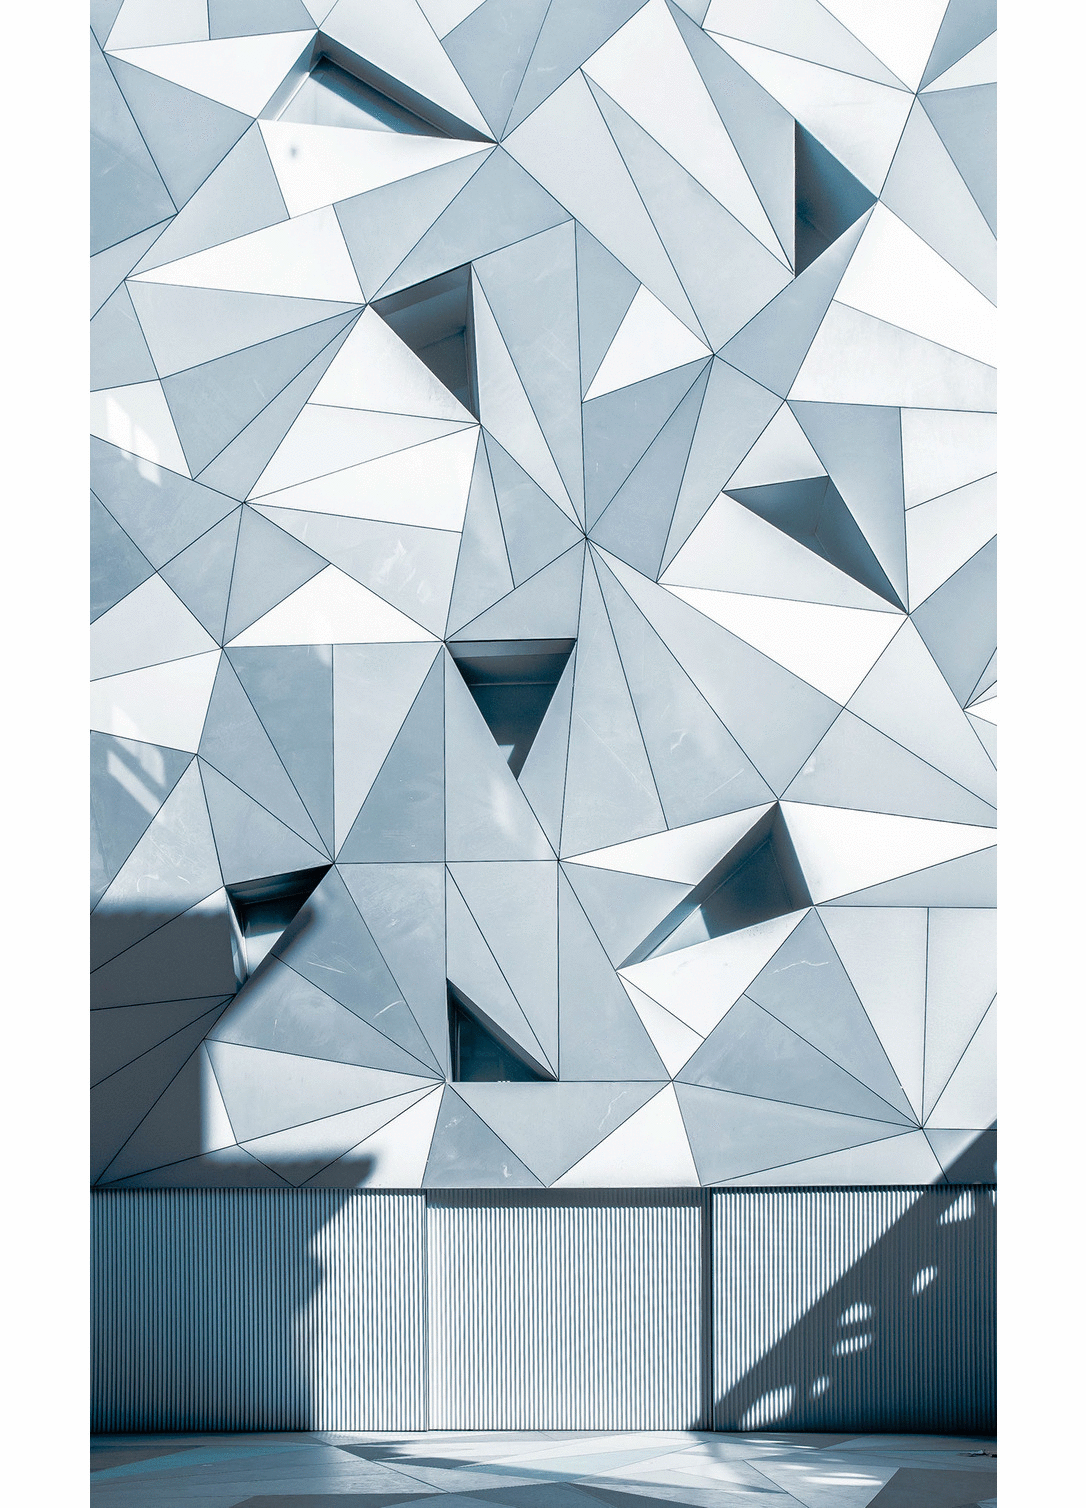 Discover Madrids Geometric Architecture Through This Photo Series